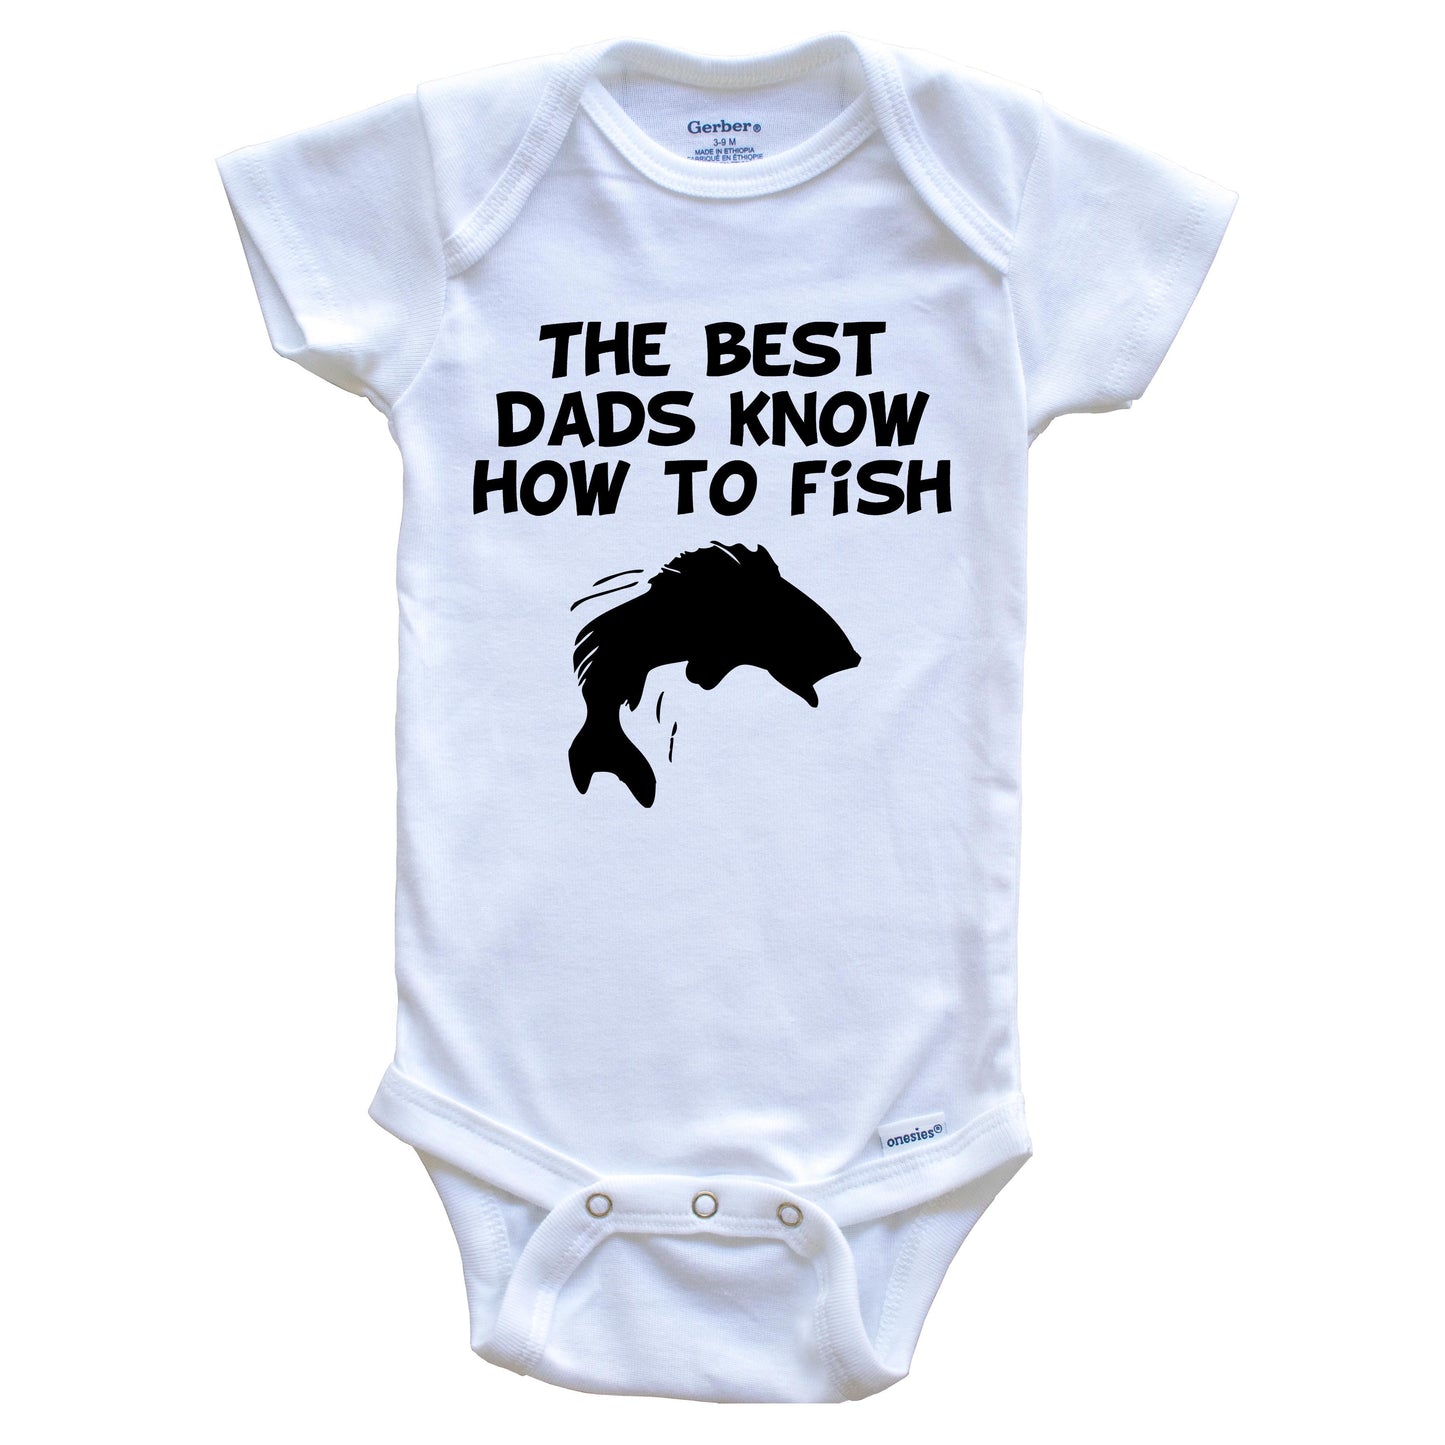 The Best Dads Know How To Fish Baby Onesie